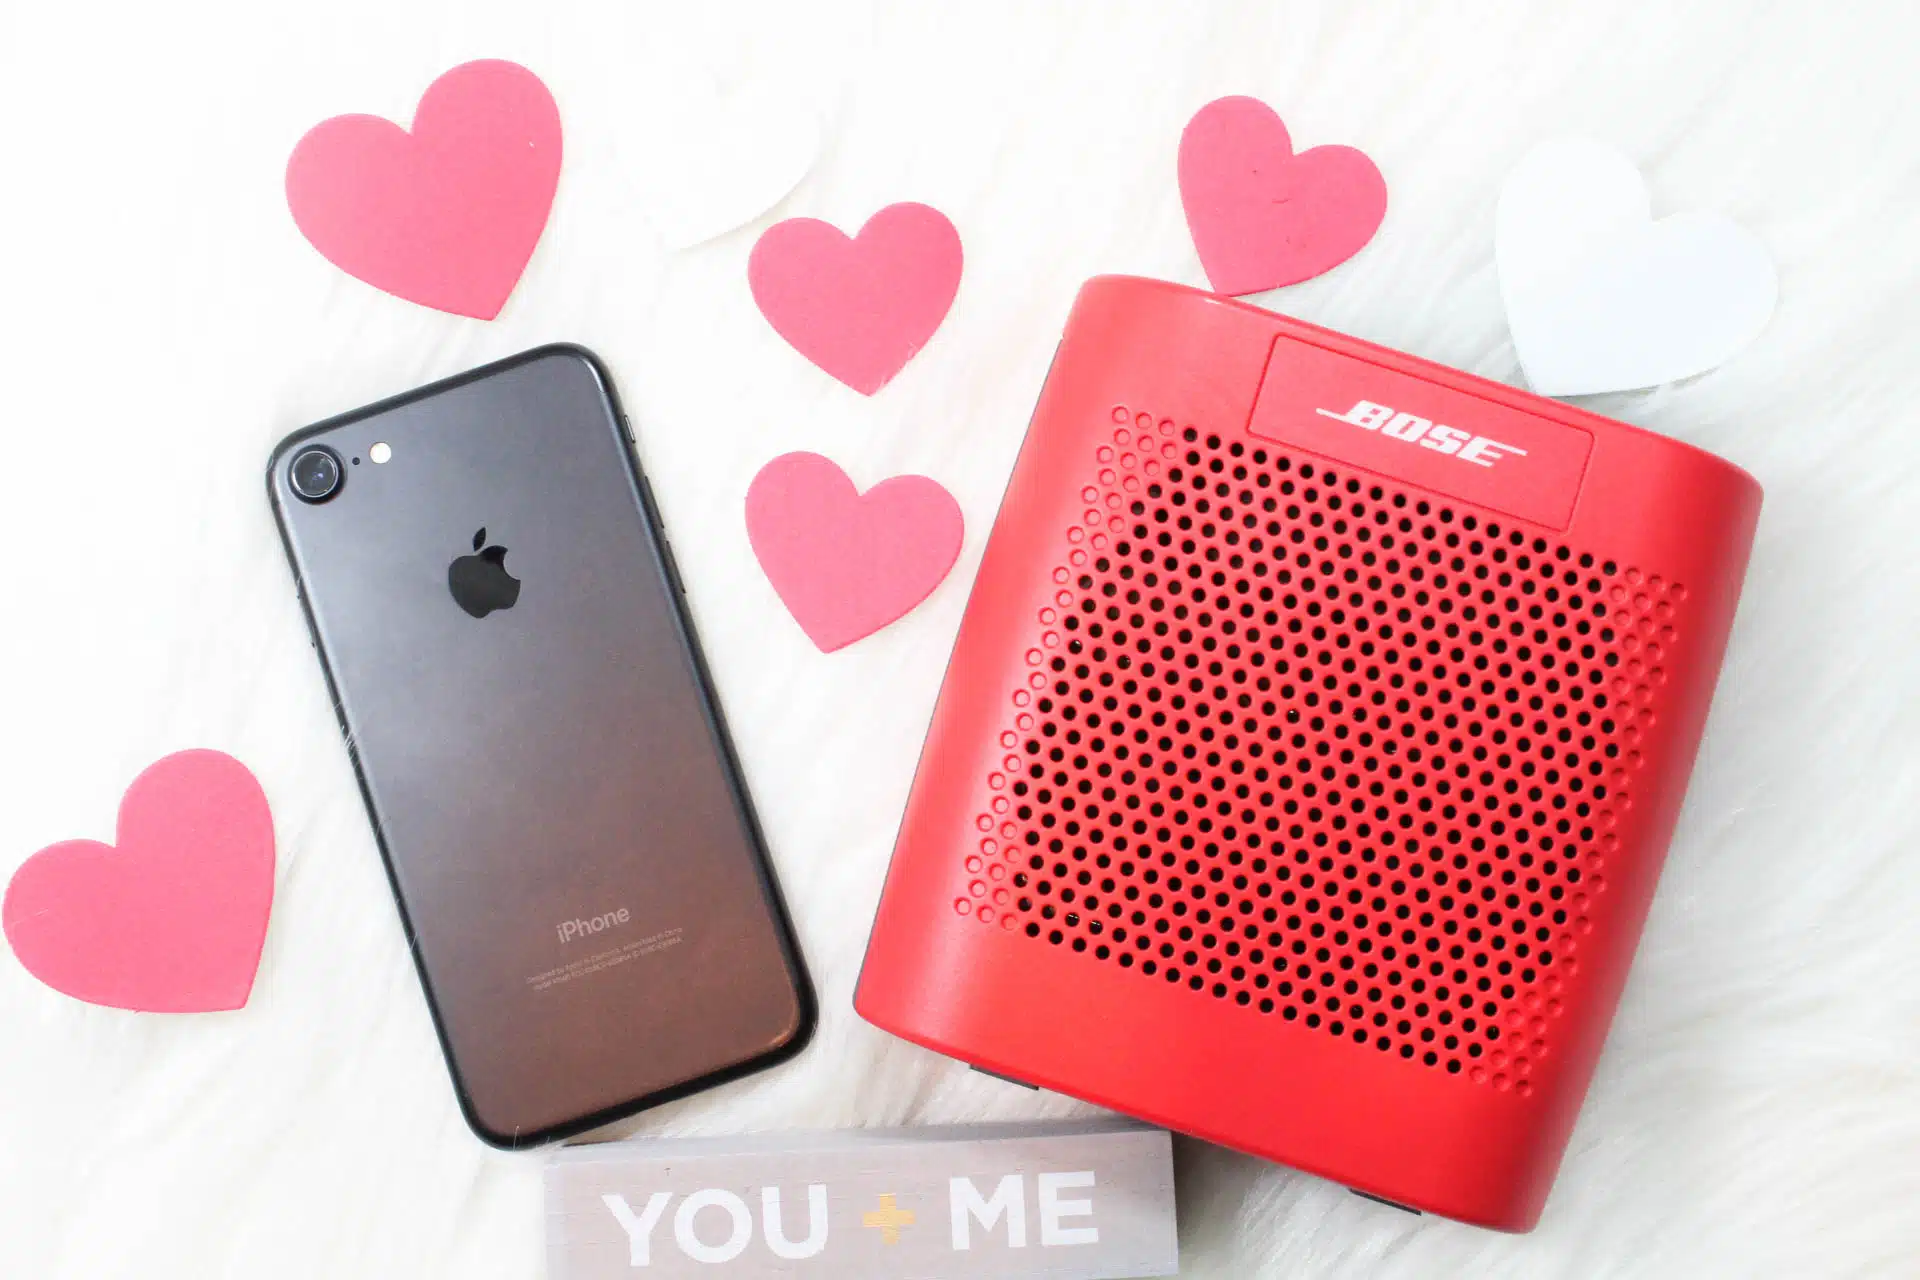 The Perfect Pairing For Any Music & Social Media Lover From Verizon